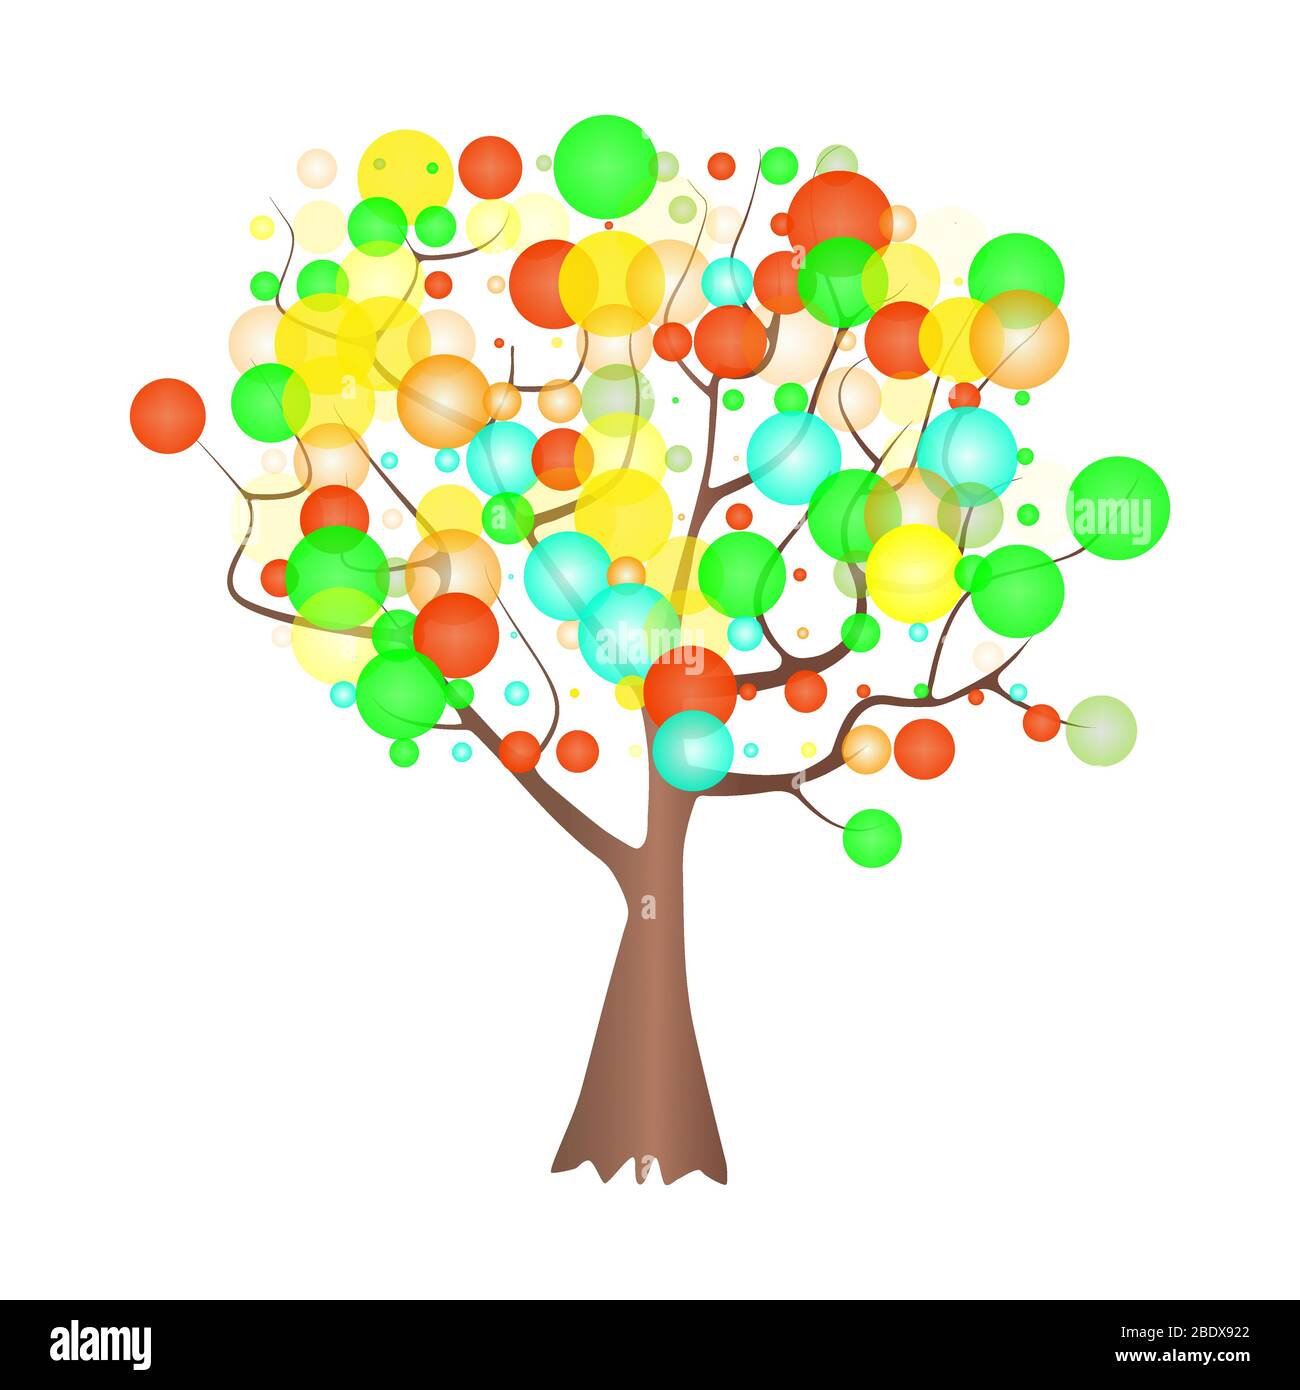 Decorative tree isolated on white background. Tree icon with colored bubbles around the branches. Stylized tree with circle shaped leafs. Stock vector Stock Vector